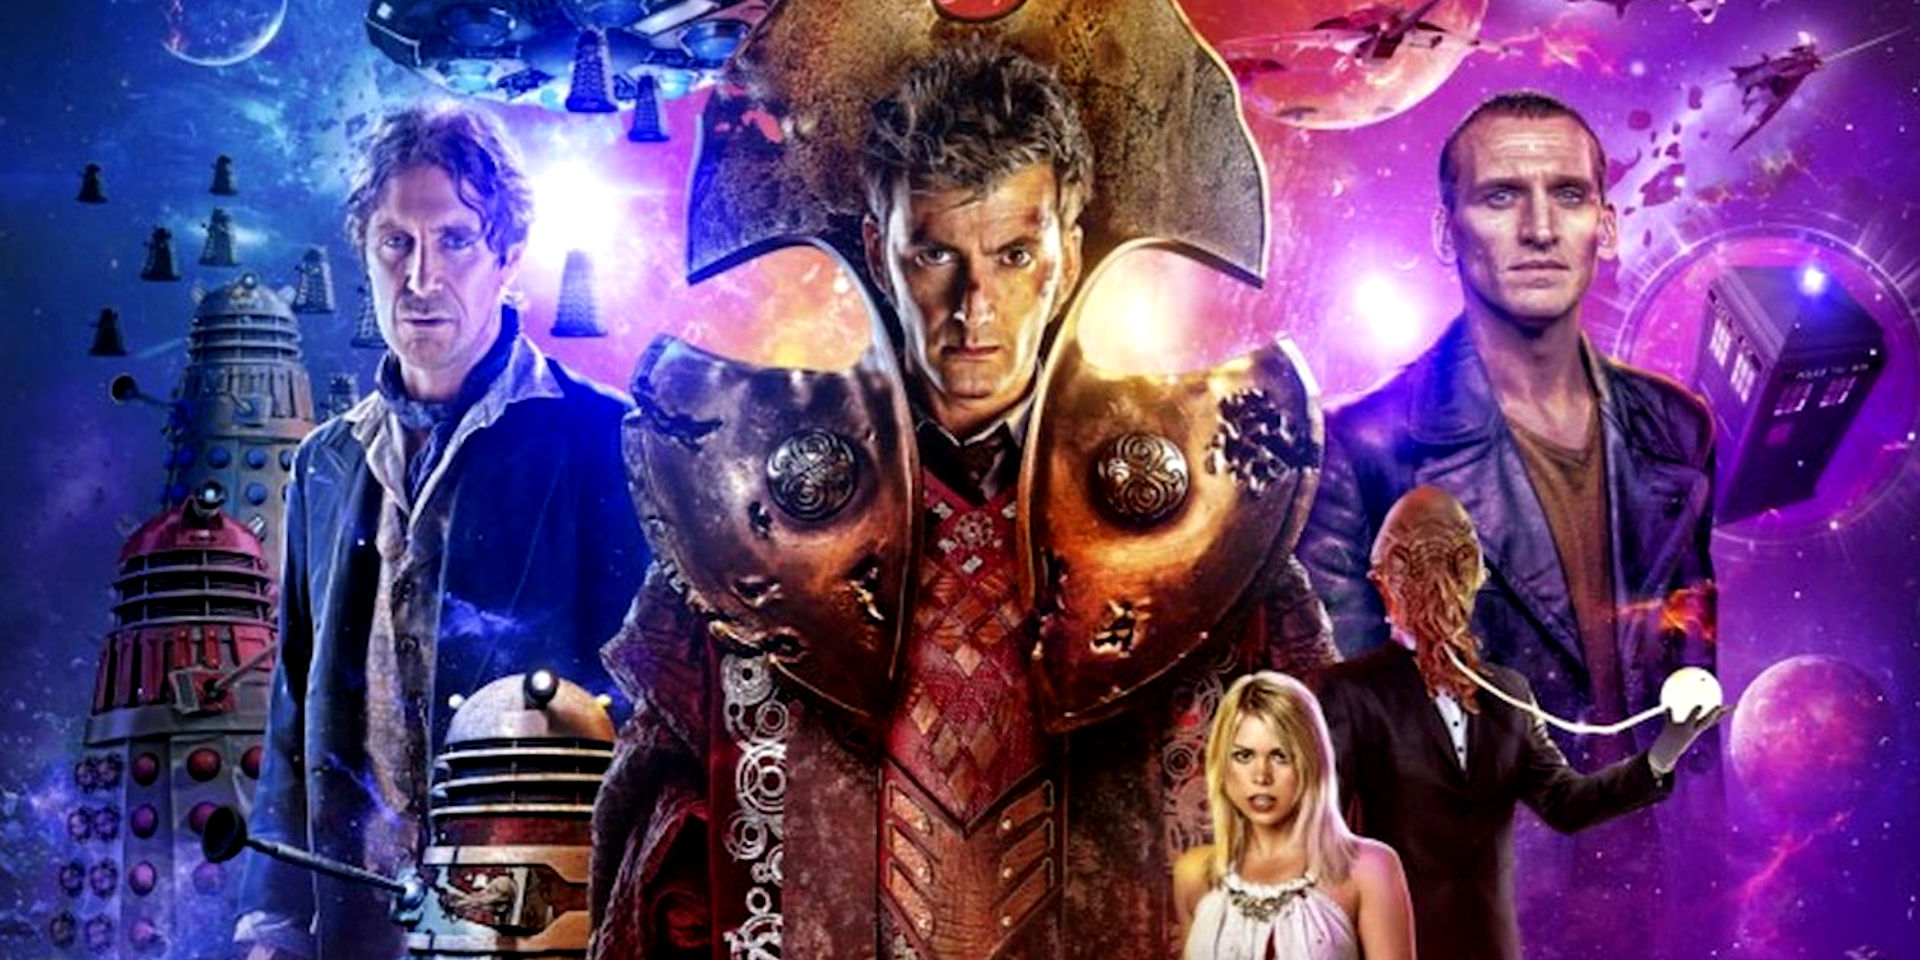 Doctor Who: Time Lord Victorious